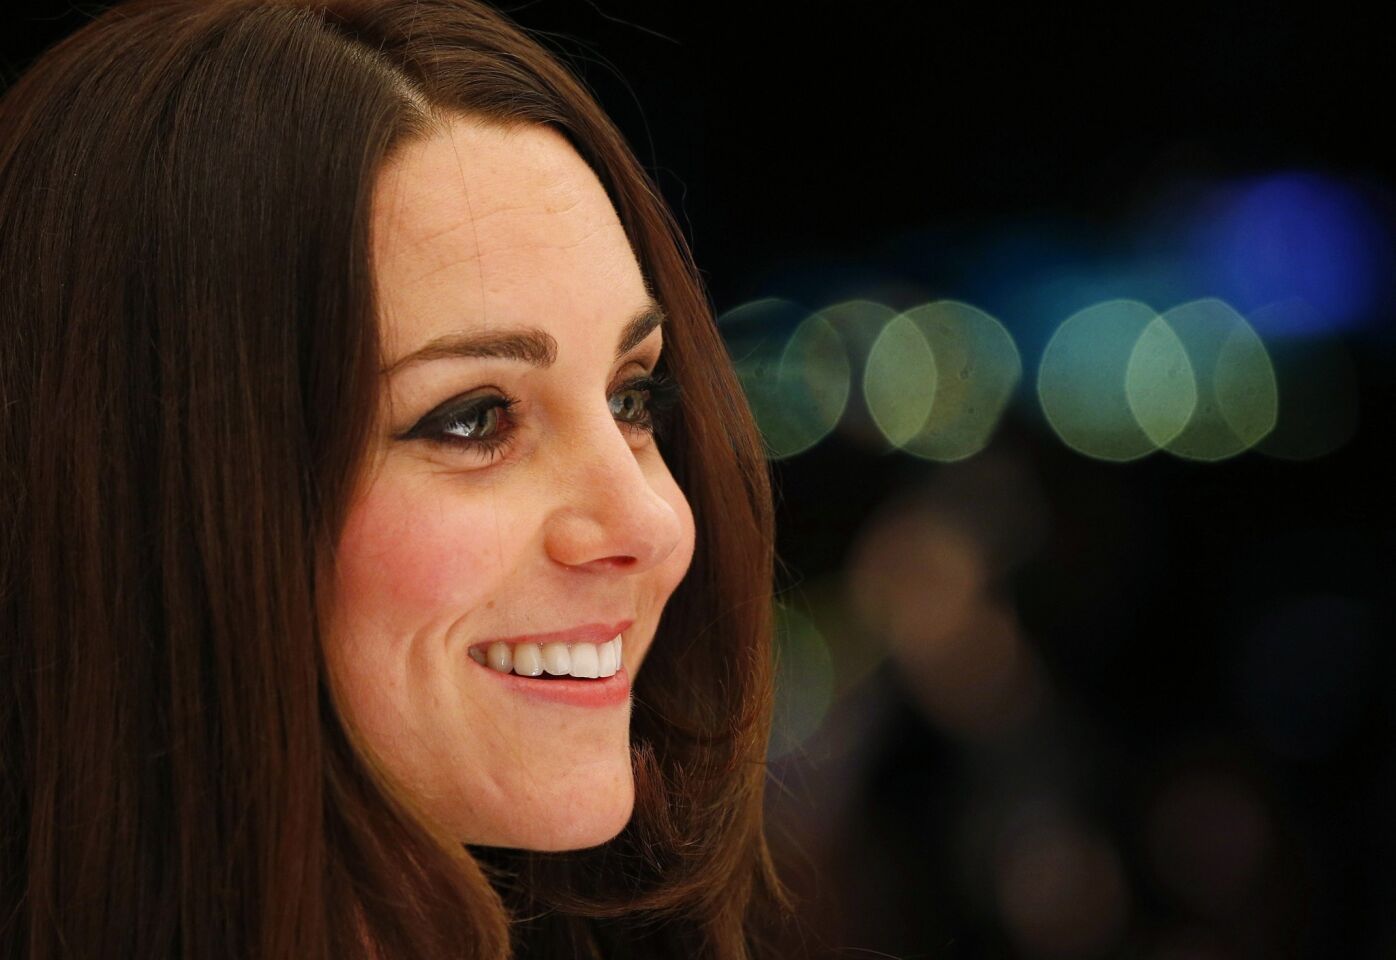 From Kate Middleton to Catherine, Duchess of Cambridge